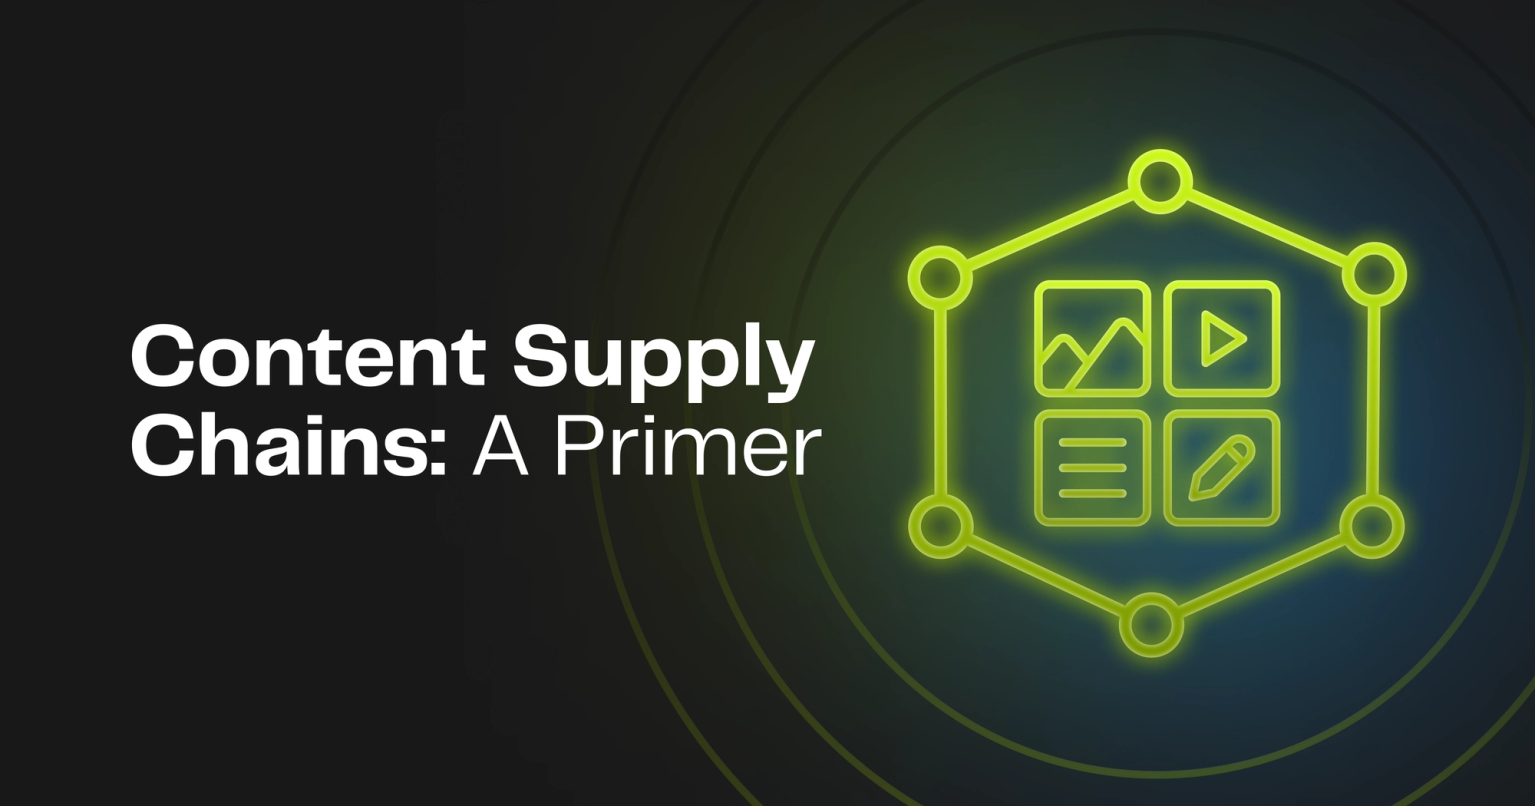 Content Supply Chains: A Primer